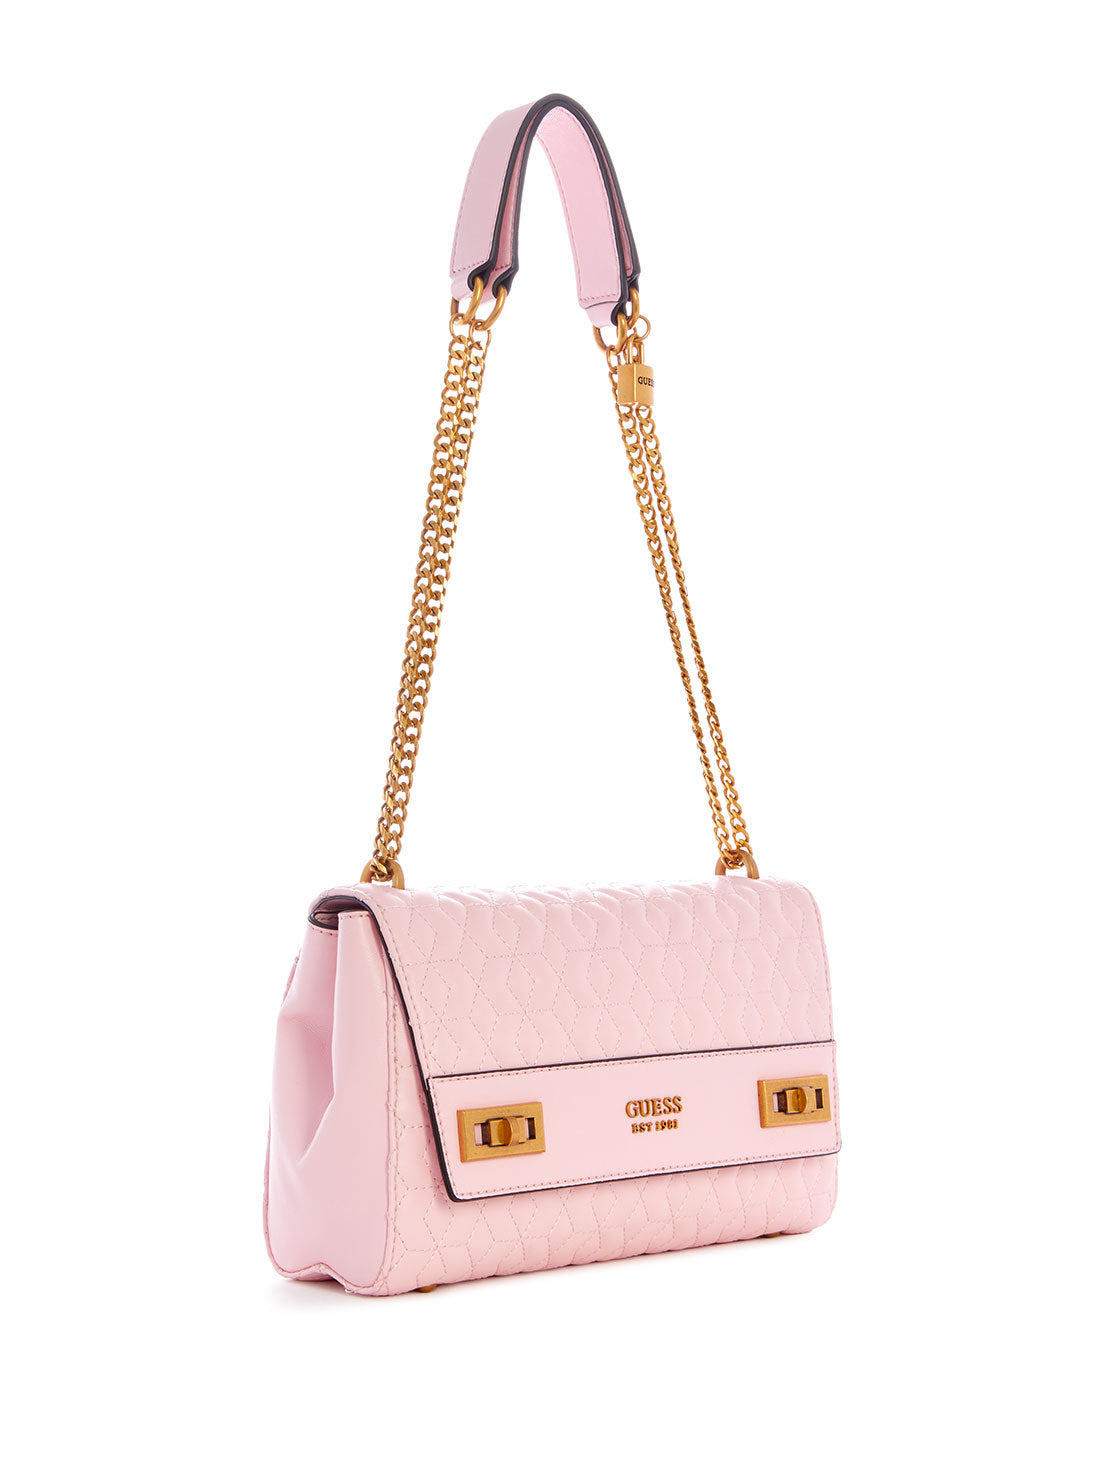 GUESS Women's Pink Katey Shoulder Bag DB787019 Front Side View